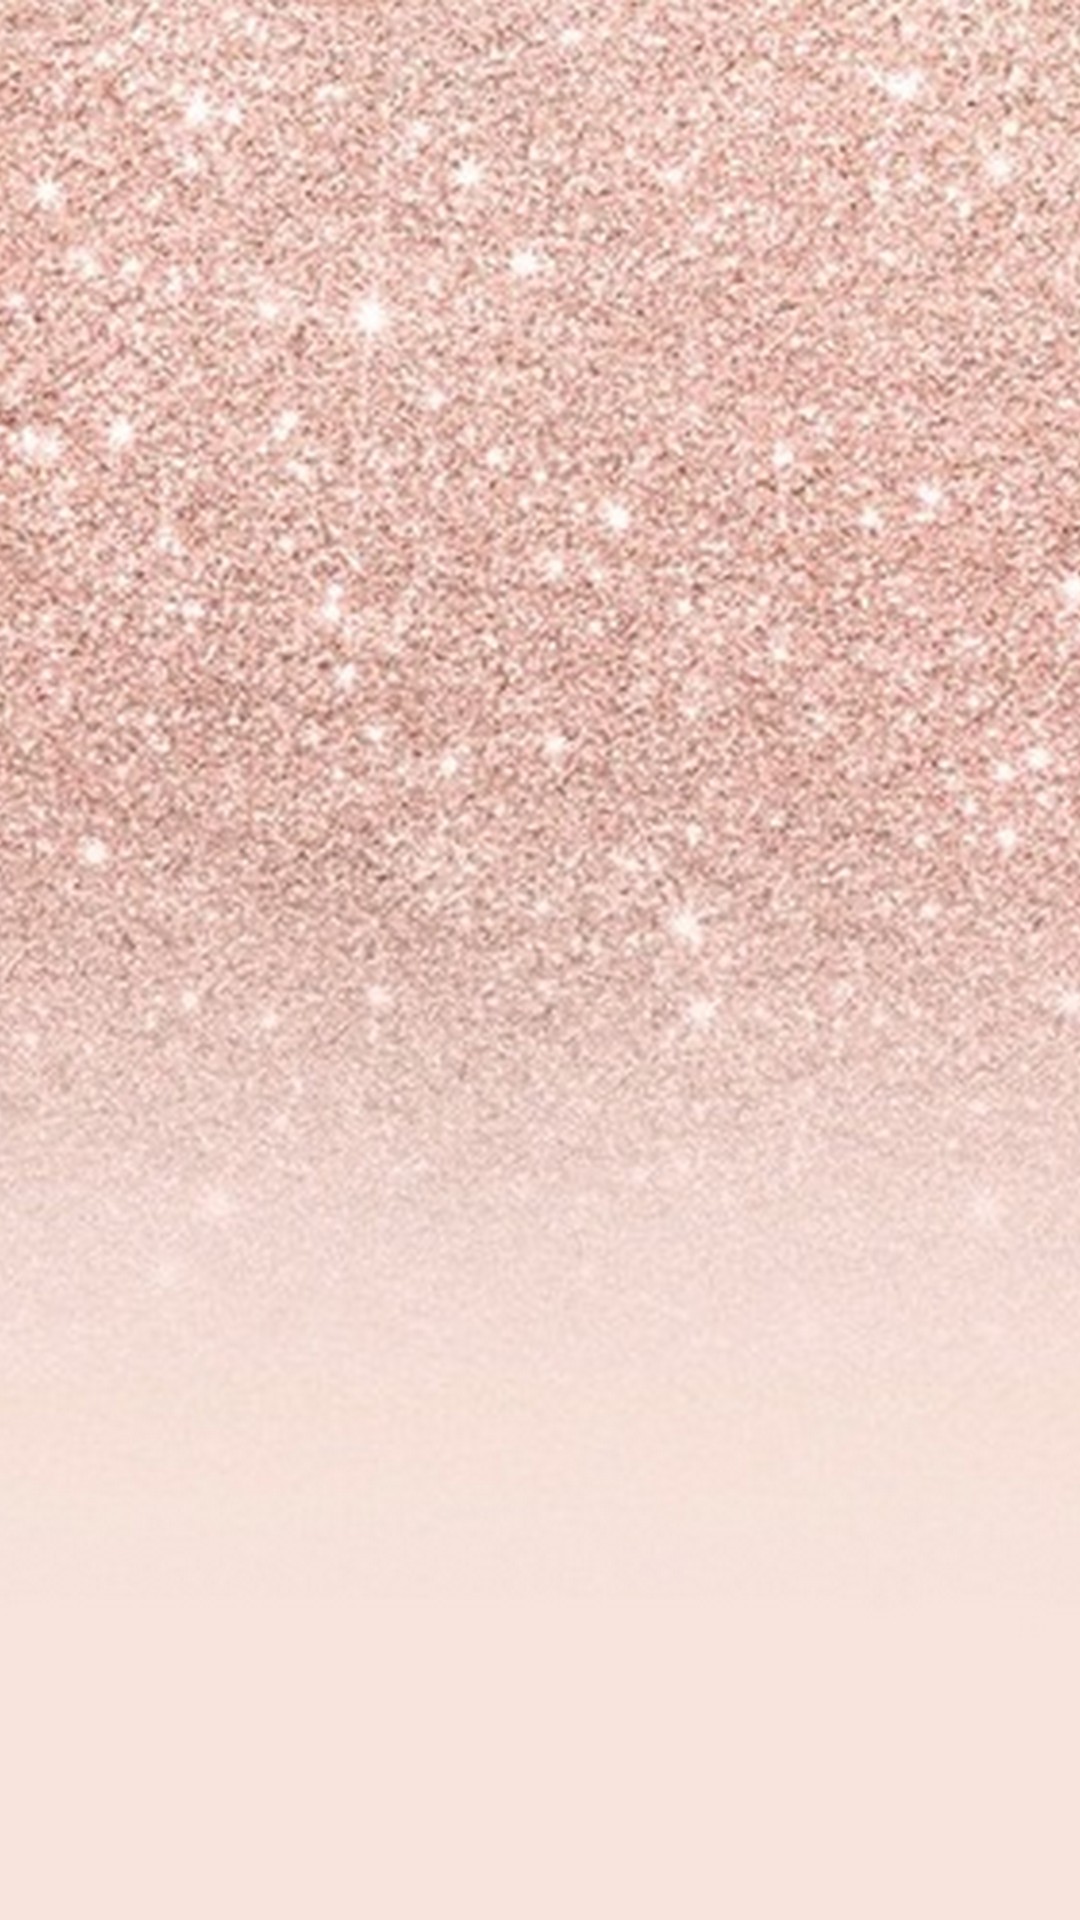 Wallpaper Rose Gold Glitter Android High Resolution 1080X1920